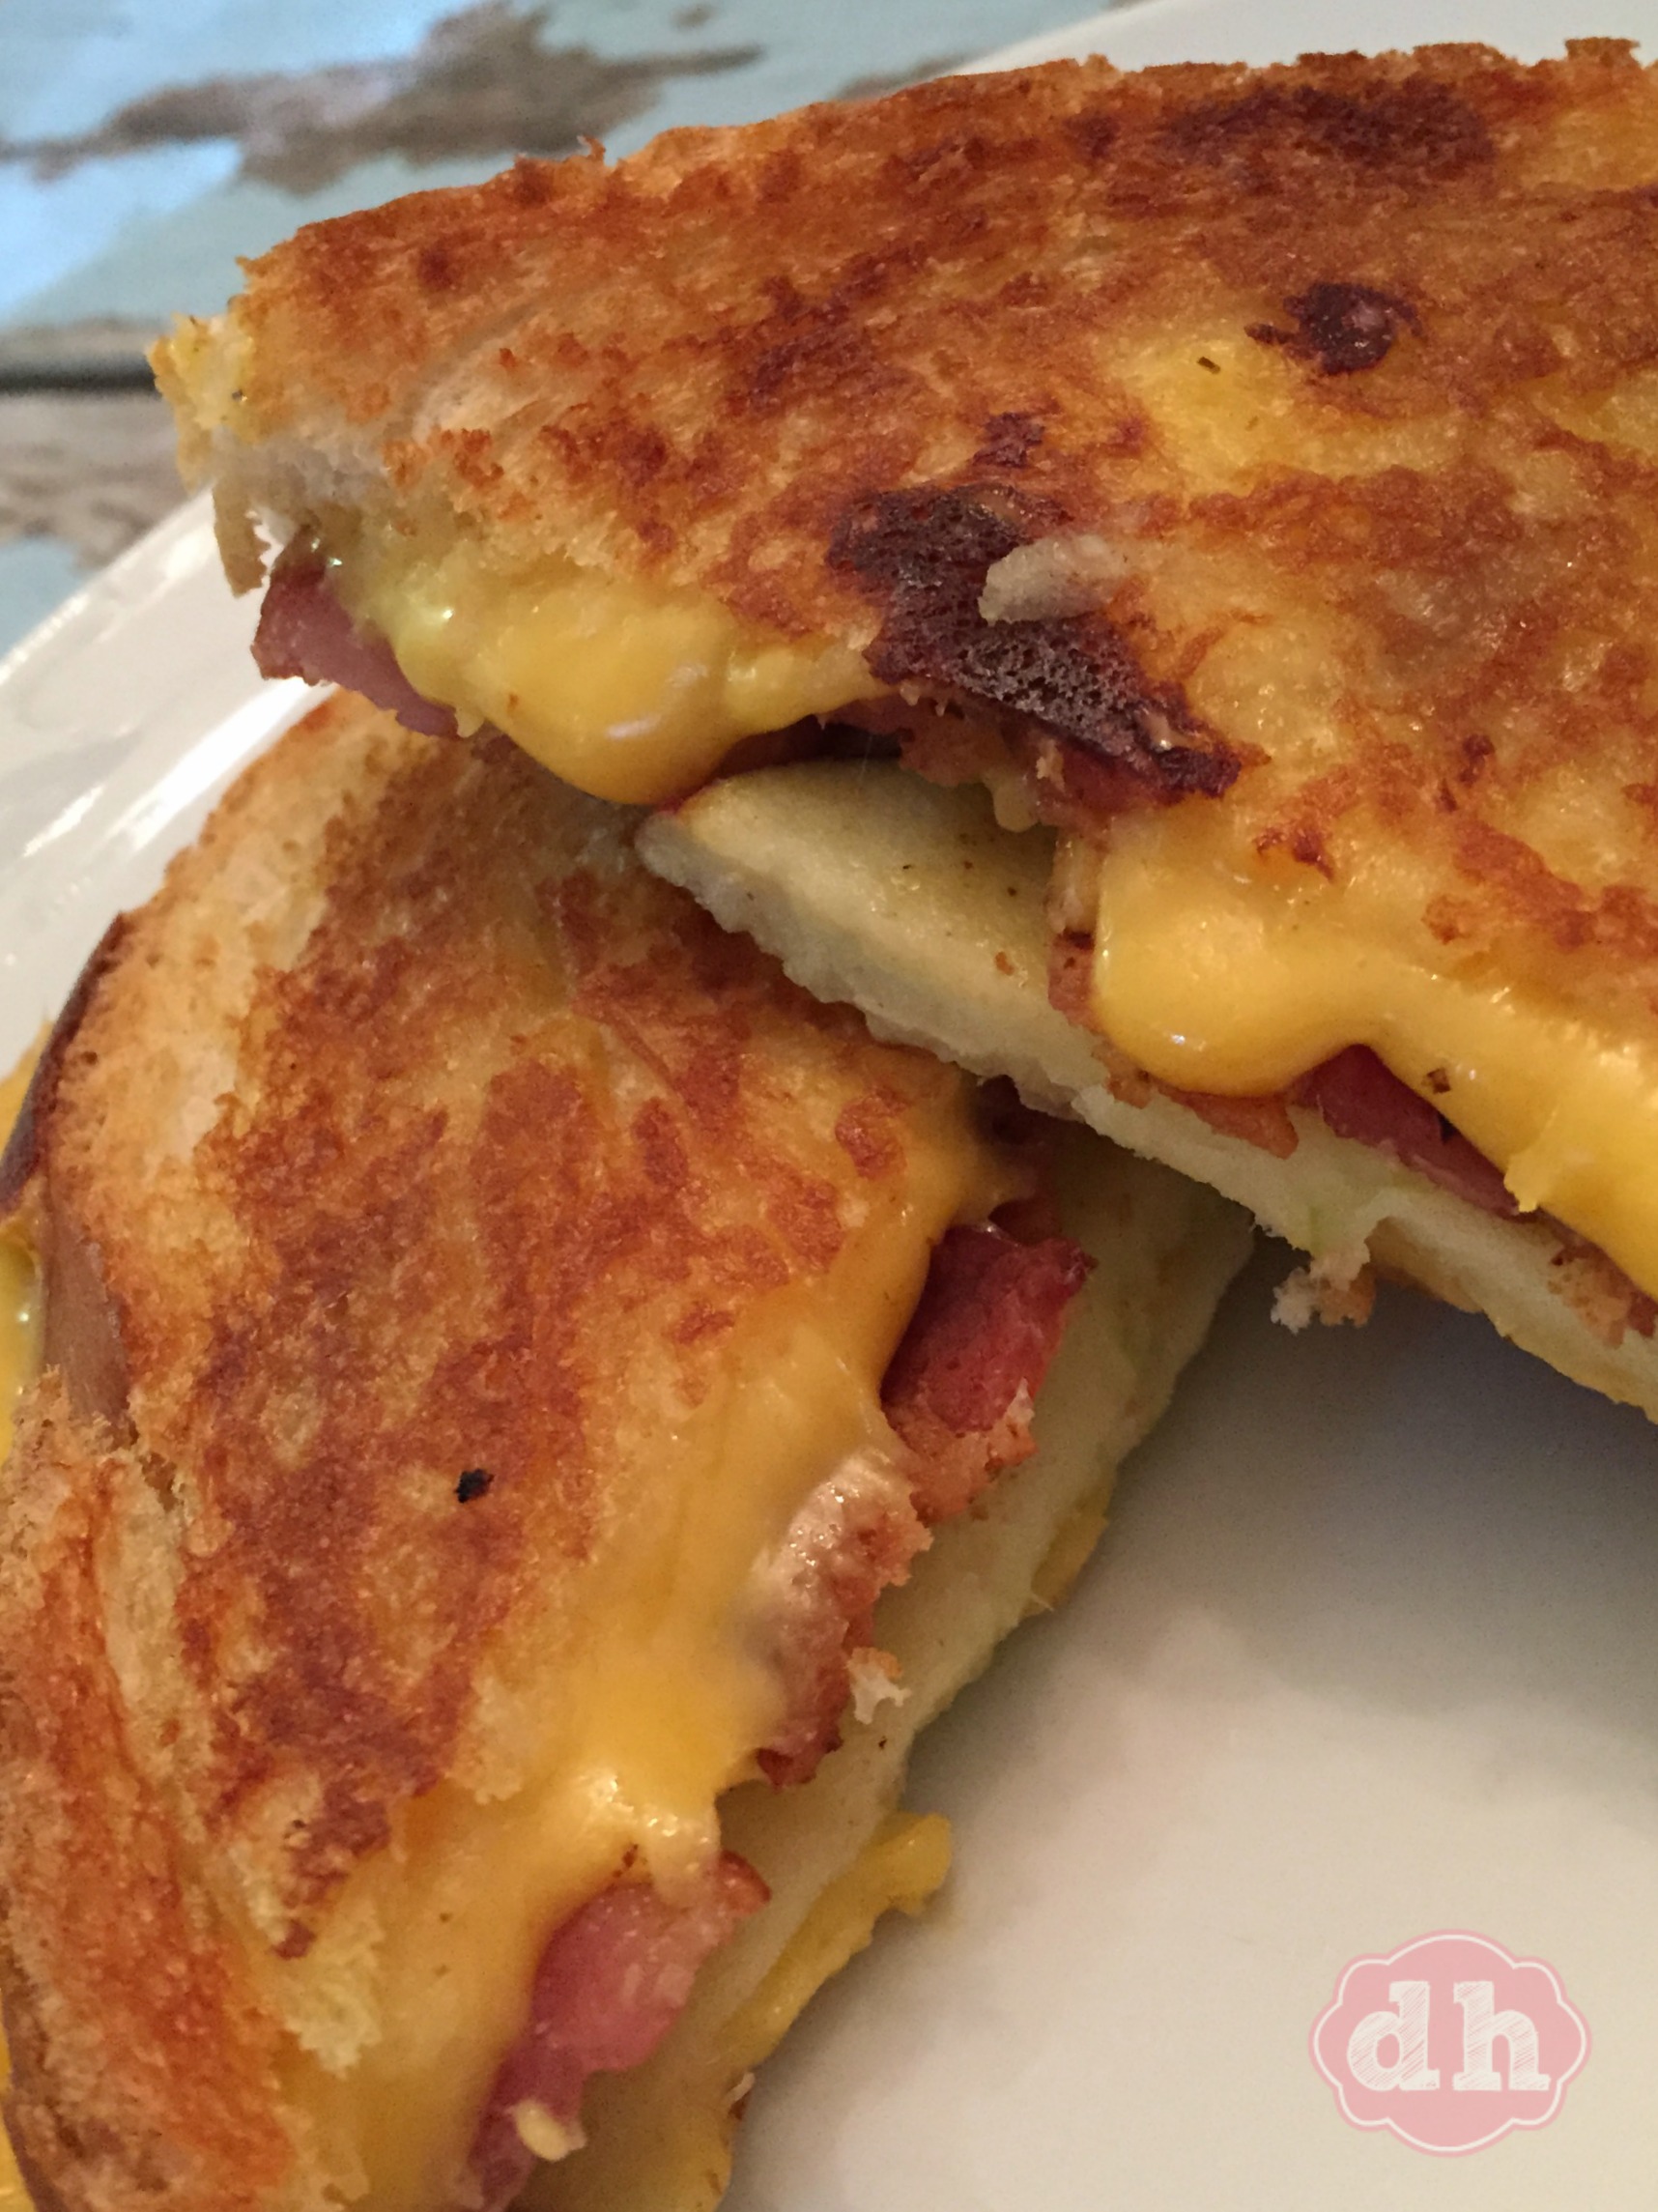 Bacon and Apple Grilled Cheese